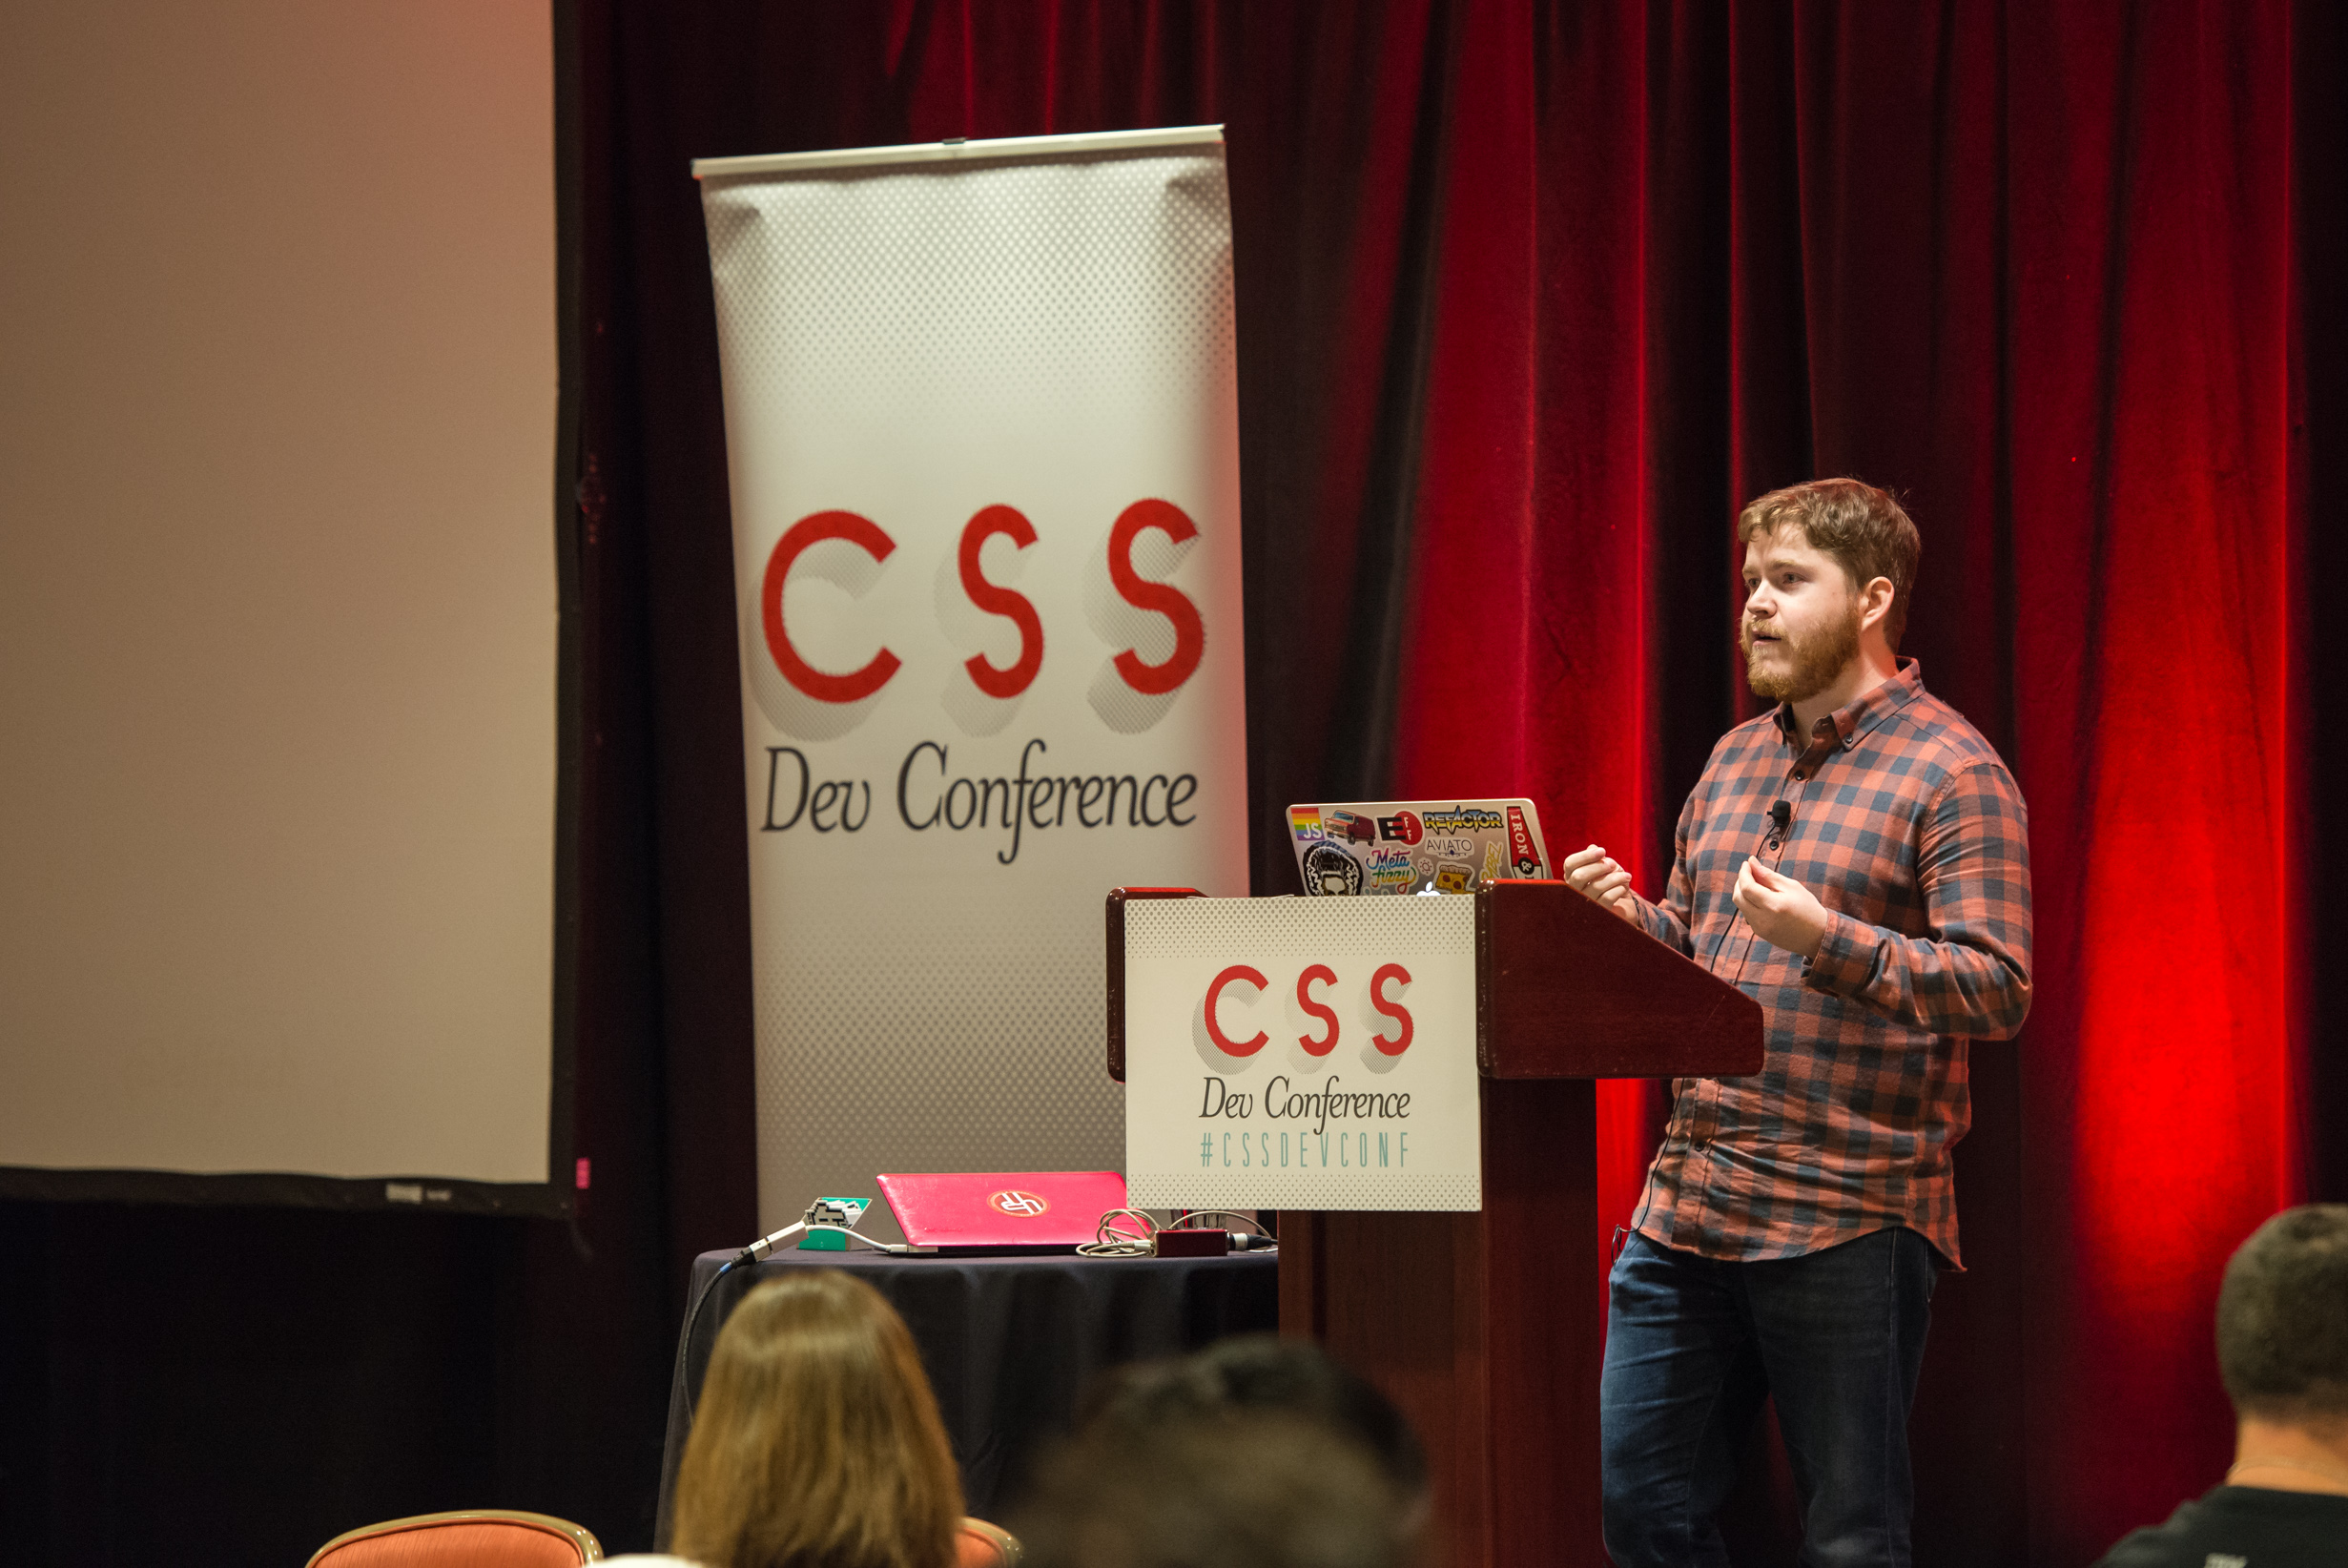 Eli at the lectern speaking at CSS Dev Conf